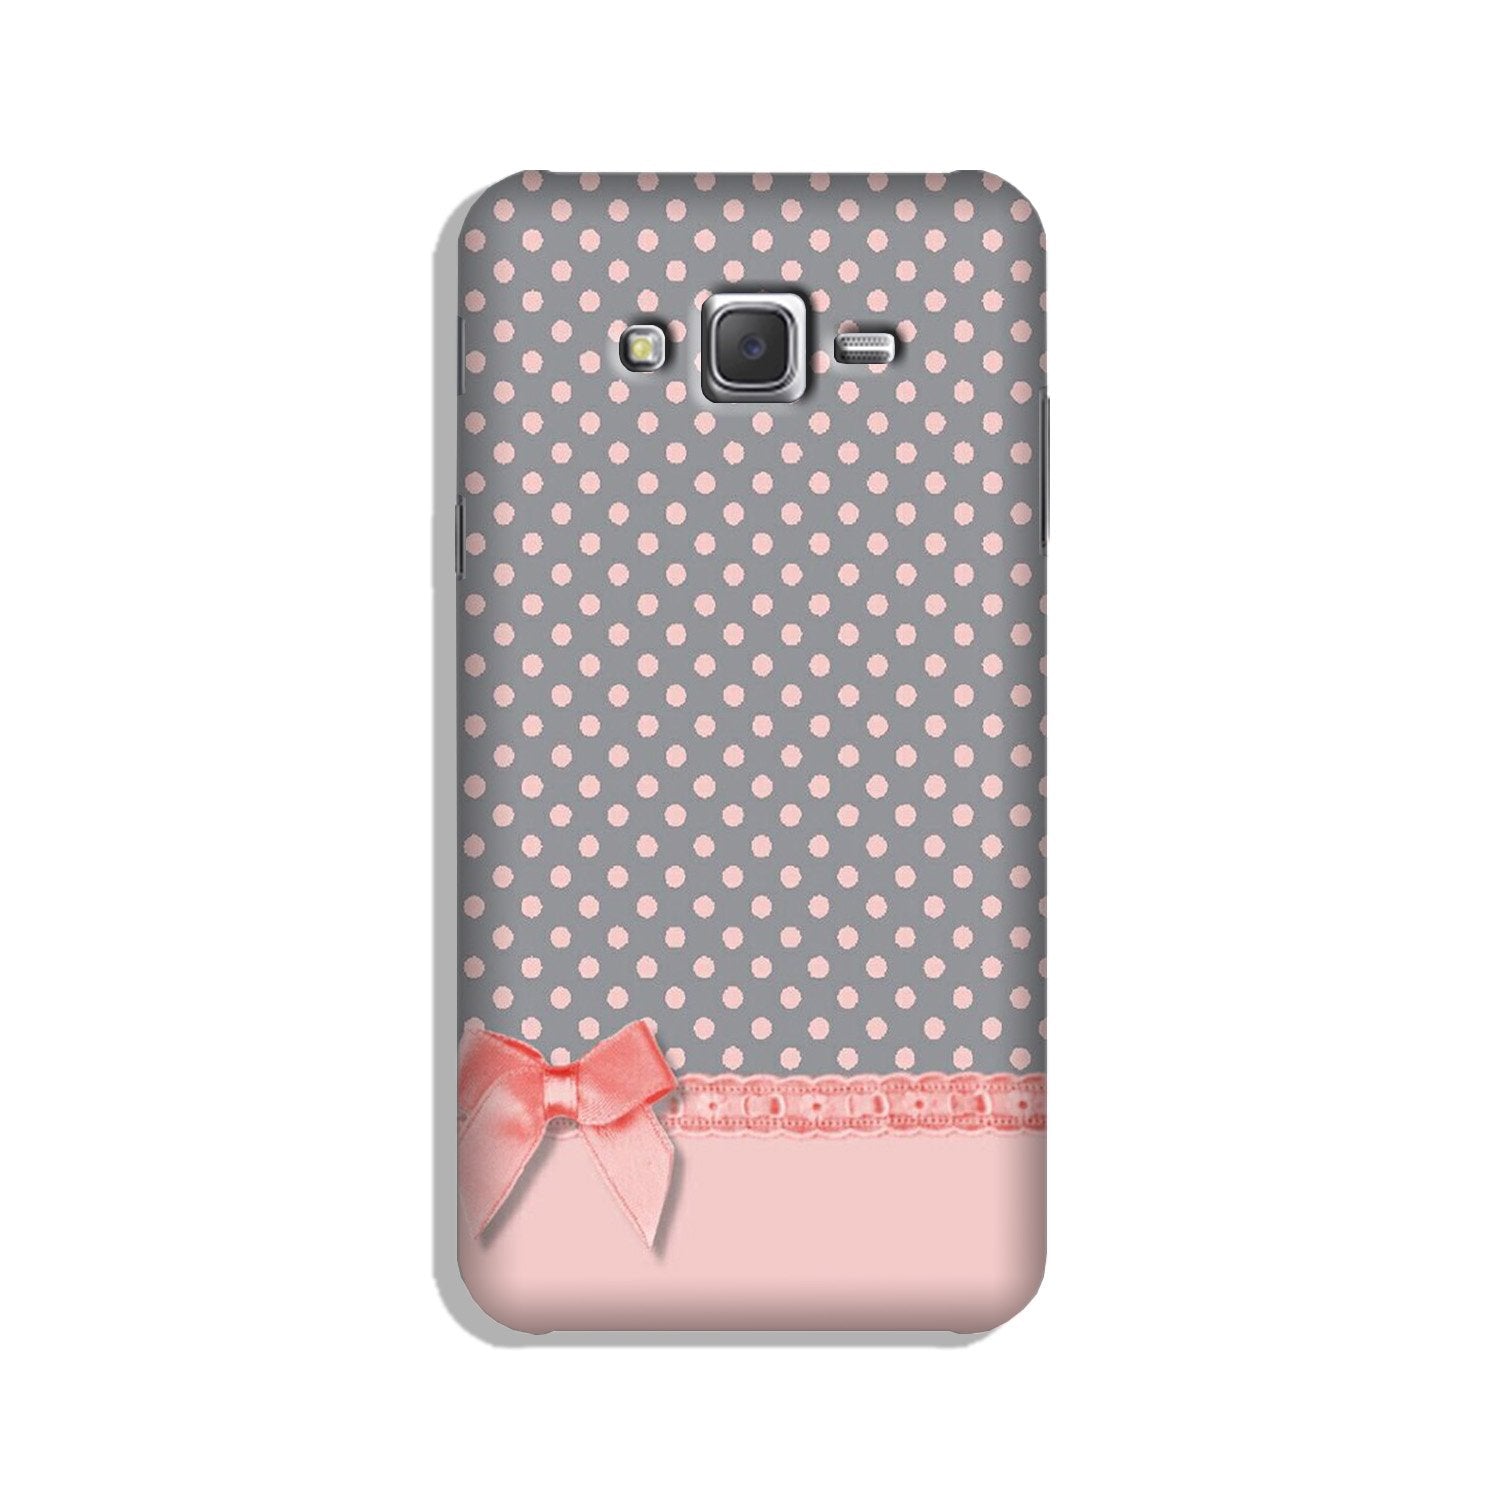 Gift Wrap2 Case for Galaxy J3 (2015)